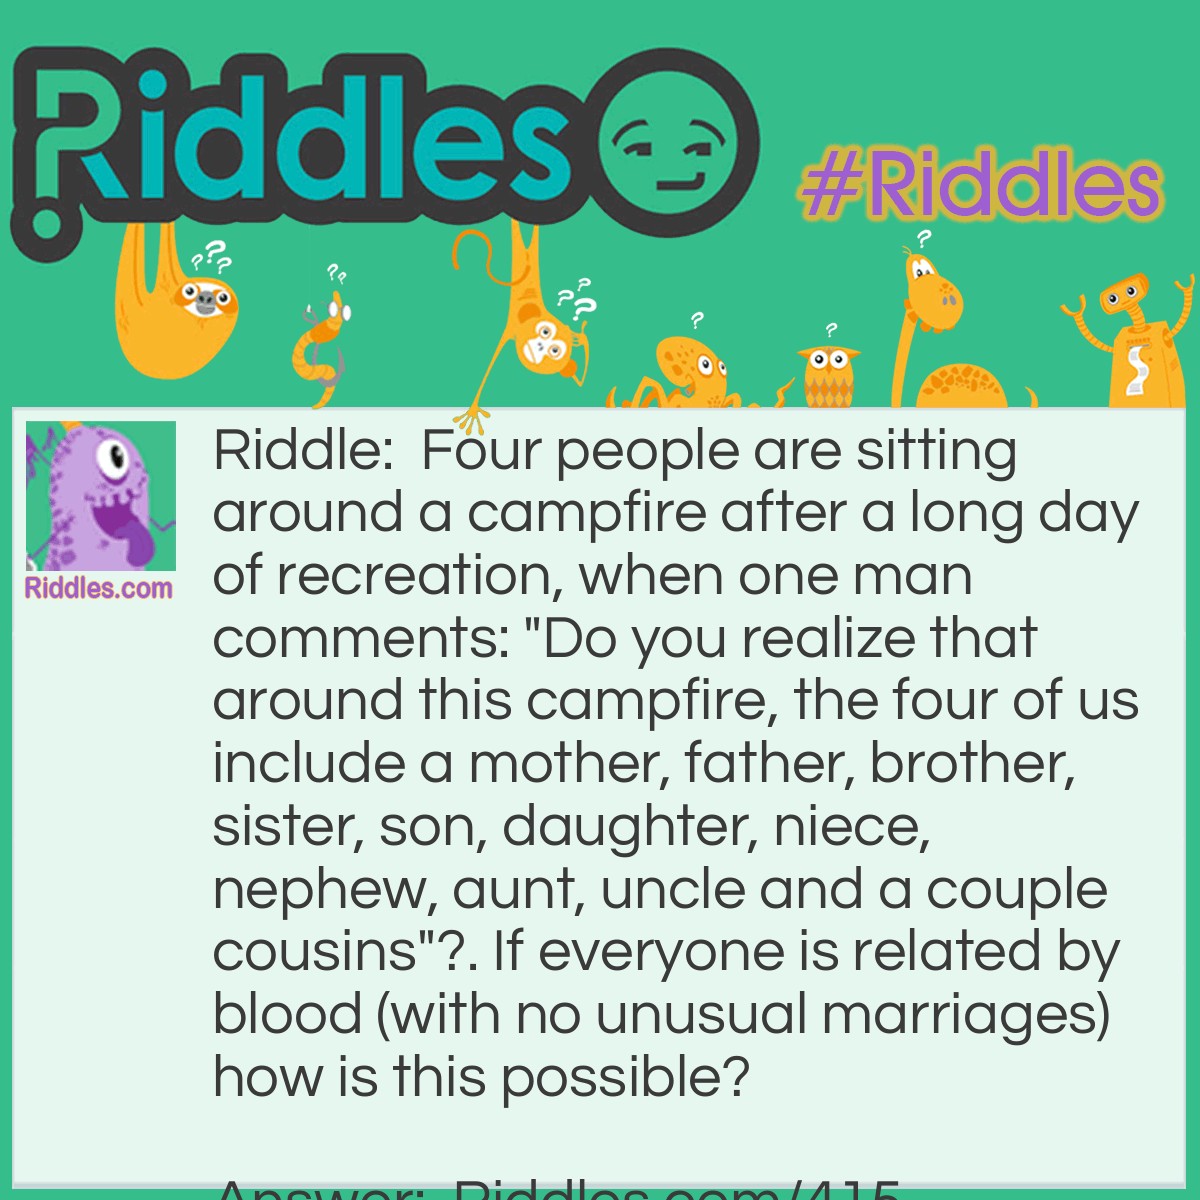 Riddle: Four people are sitting around a campfire after a long day of recreation, when one man comments: "Do you realize that around this campfire, the four of us include a mother, father, brother, sister, son, daughter, niece, nephew, aunt, uncle and a couple cousins"?. If everyone is related by blood (with no unusual marriages) how is this possible? Answer: The campfire circle includes a woman and her brother. The woman's daughter and the man's son are also present.